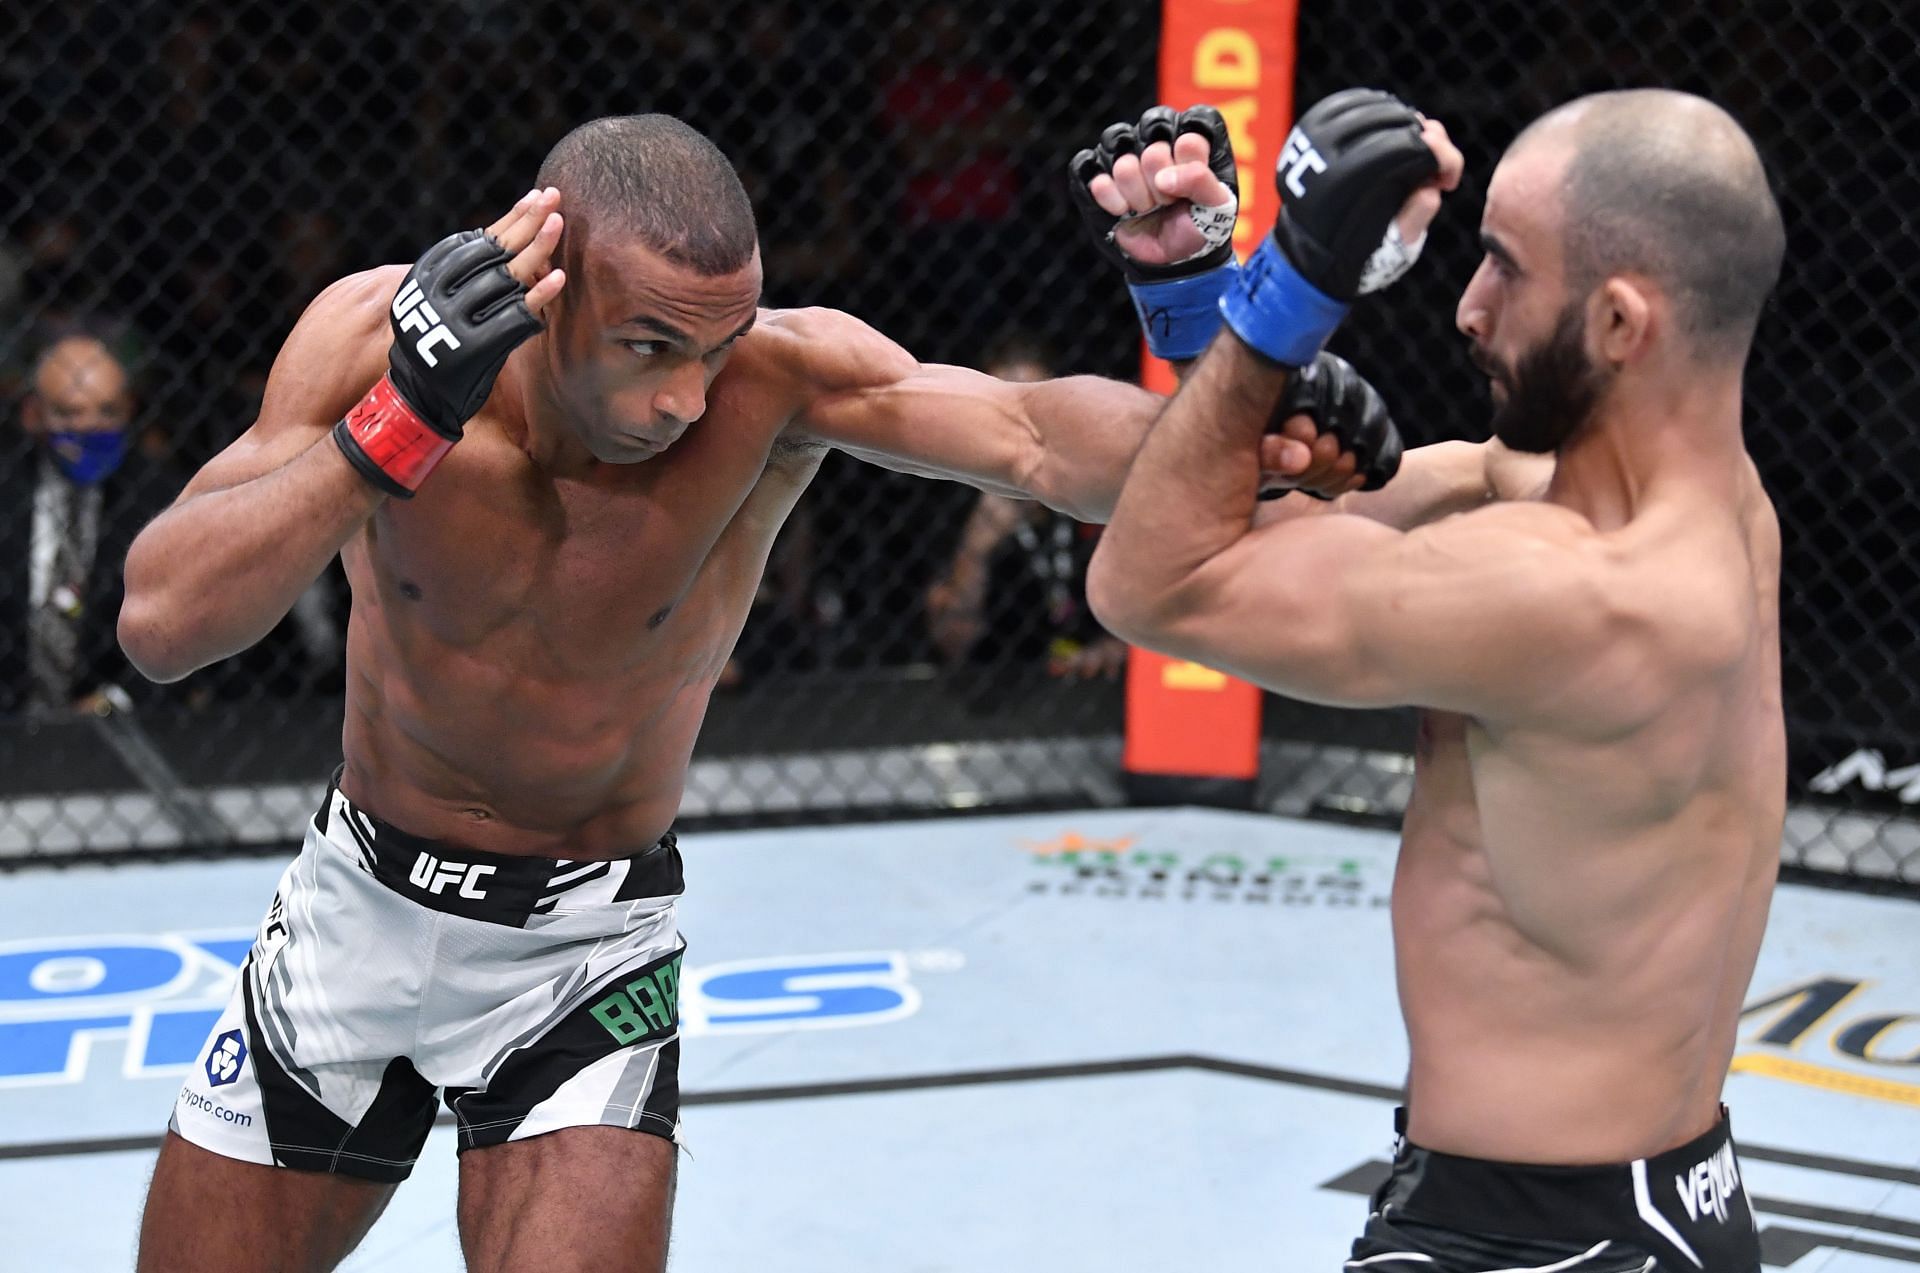 Edson Barboza has been responsible for some classic UFC moments, but his time on the roster may be coming to an end